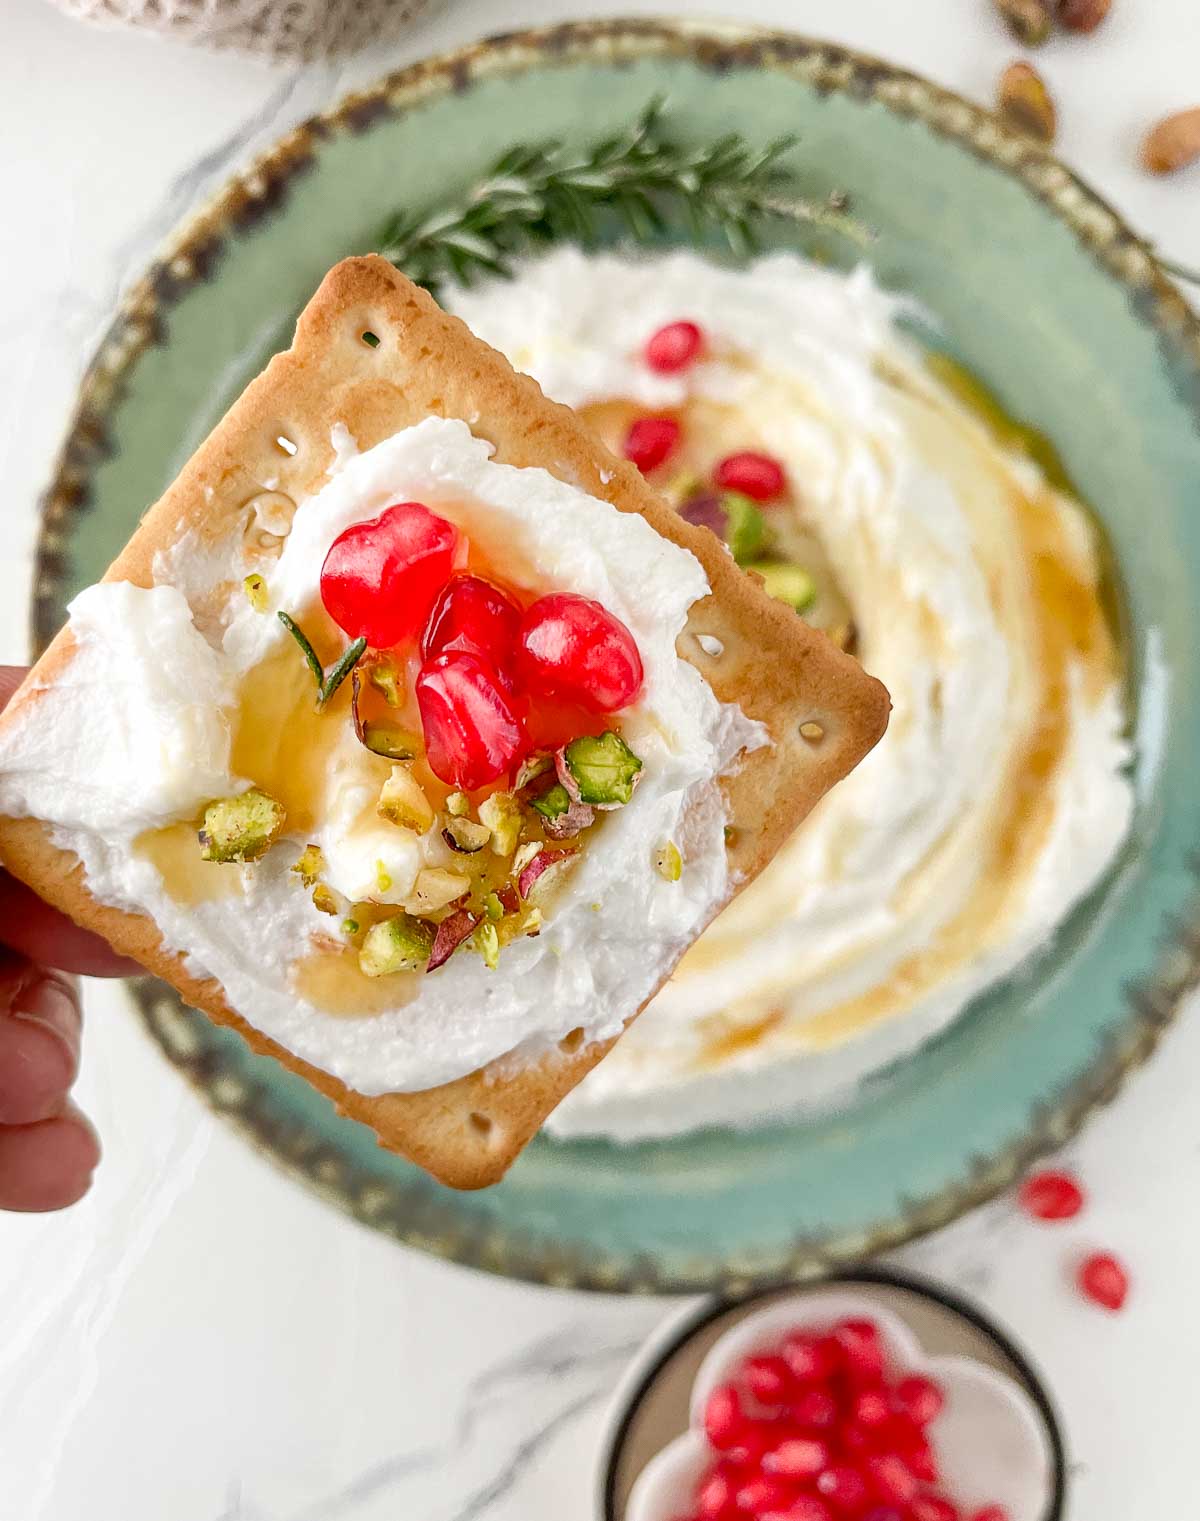 Goat cheese dip with honey, pistachios, and pomegranate on a cracker